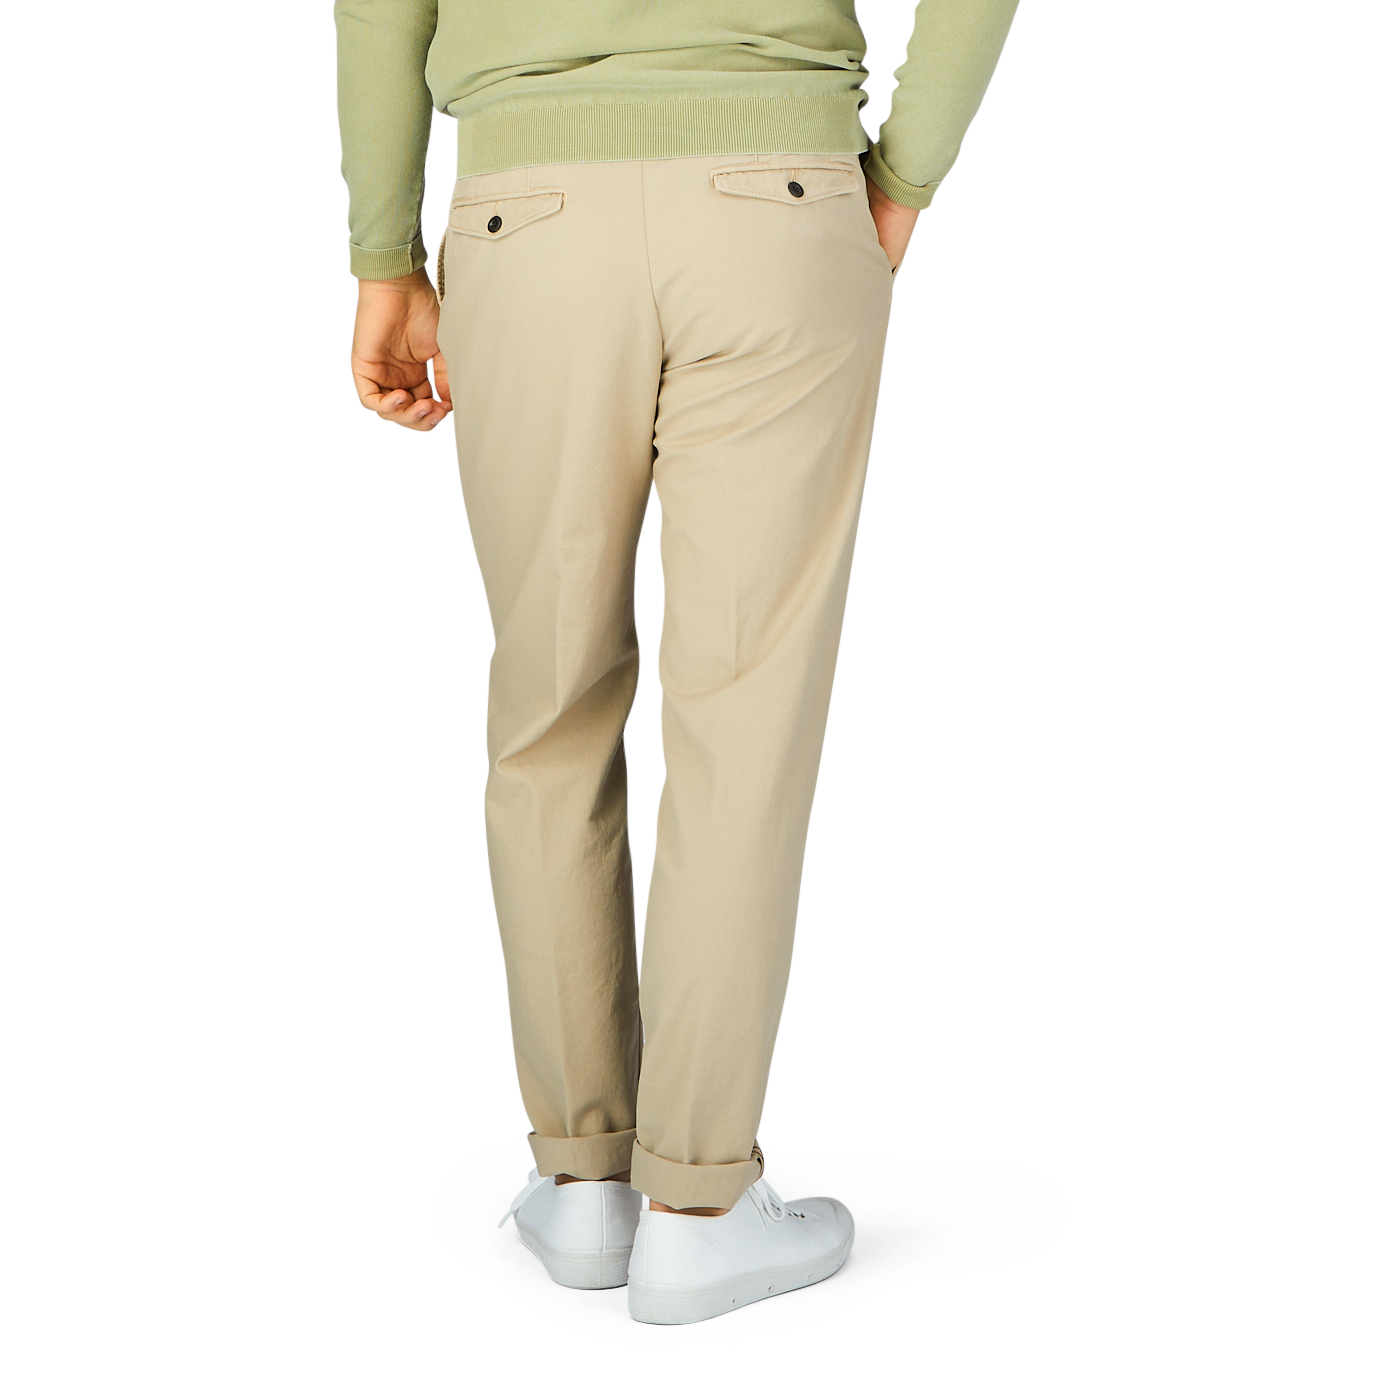 The back view of a man wearing a beige sweater and Incotex Beige Cotton Stretch Pleated Chinos.